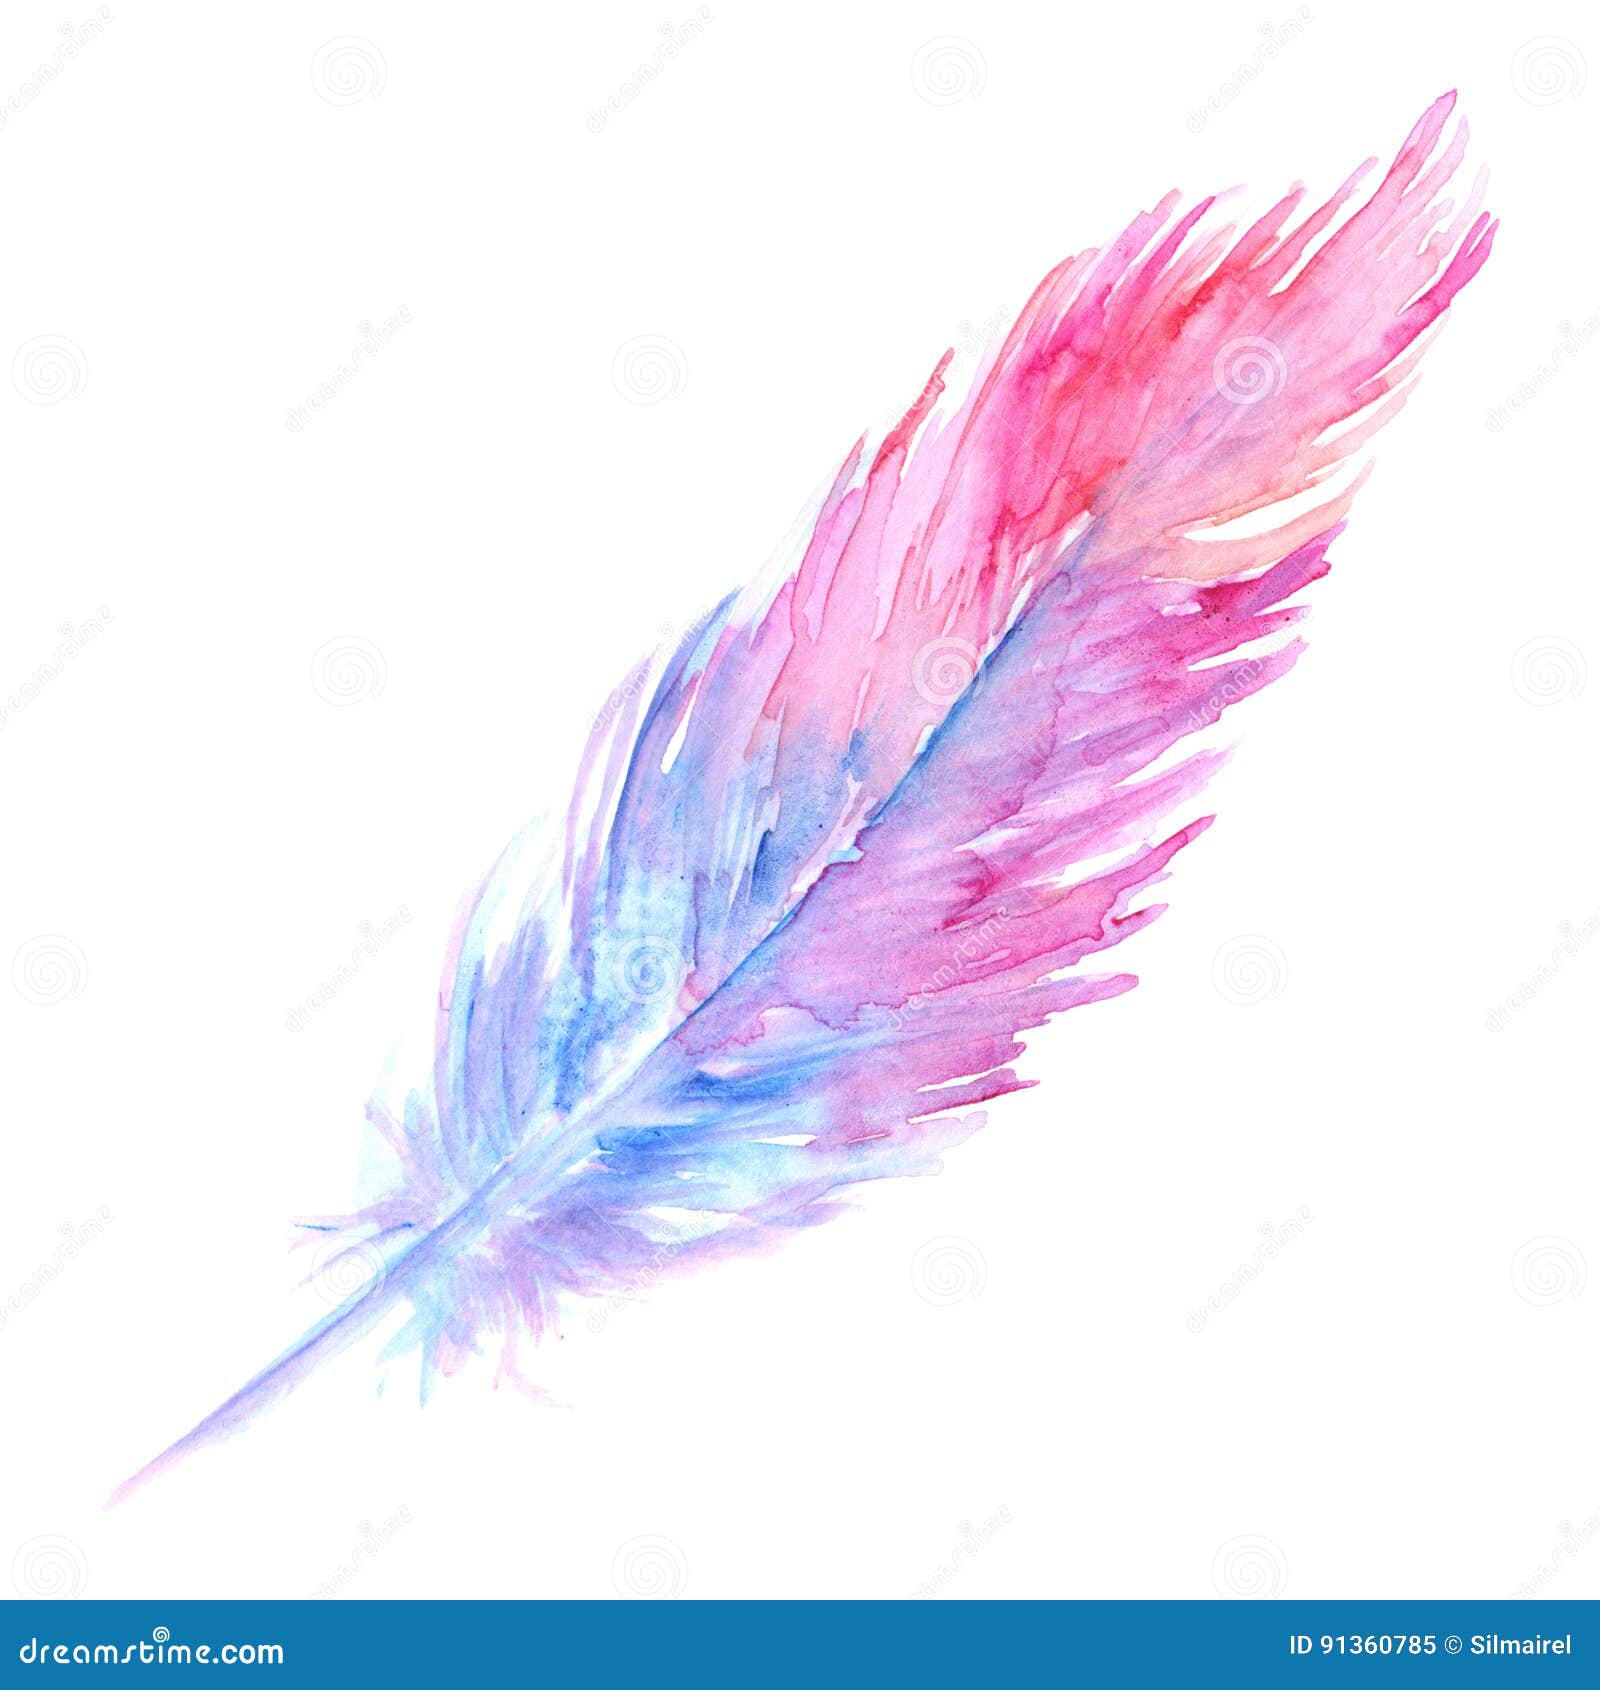 Blue and Feathers Too! Pink